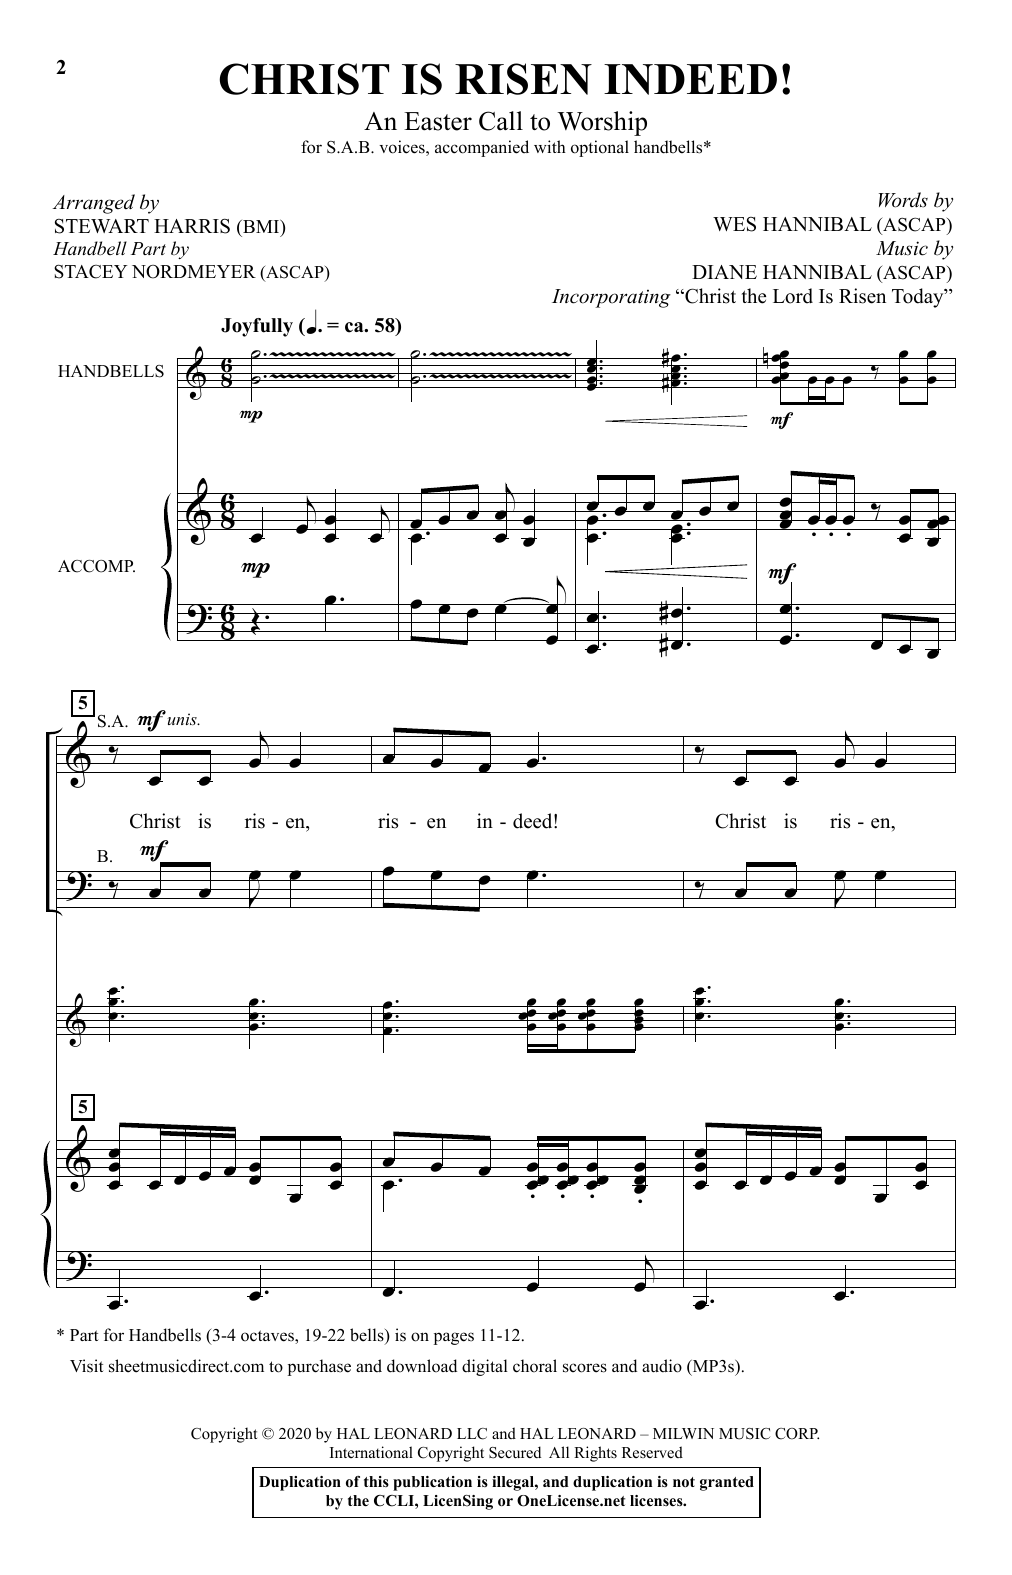 Download Wes Hannibal and Diane Hannibal Christ Is Risen Indeed! (An Easter Call Sheet Music